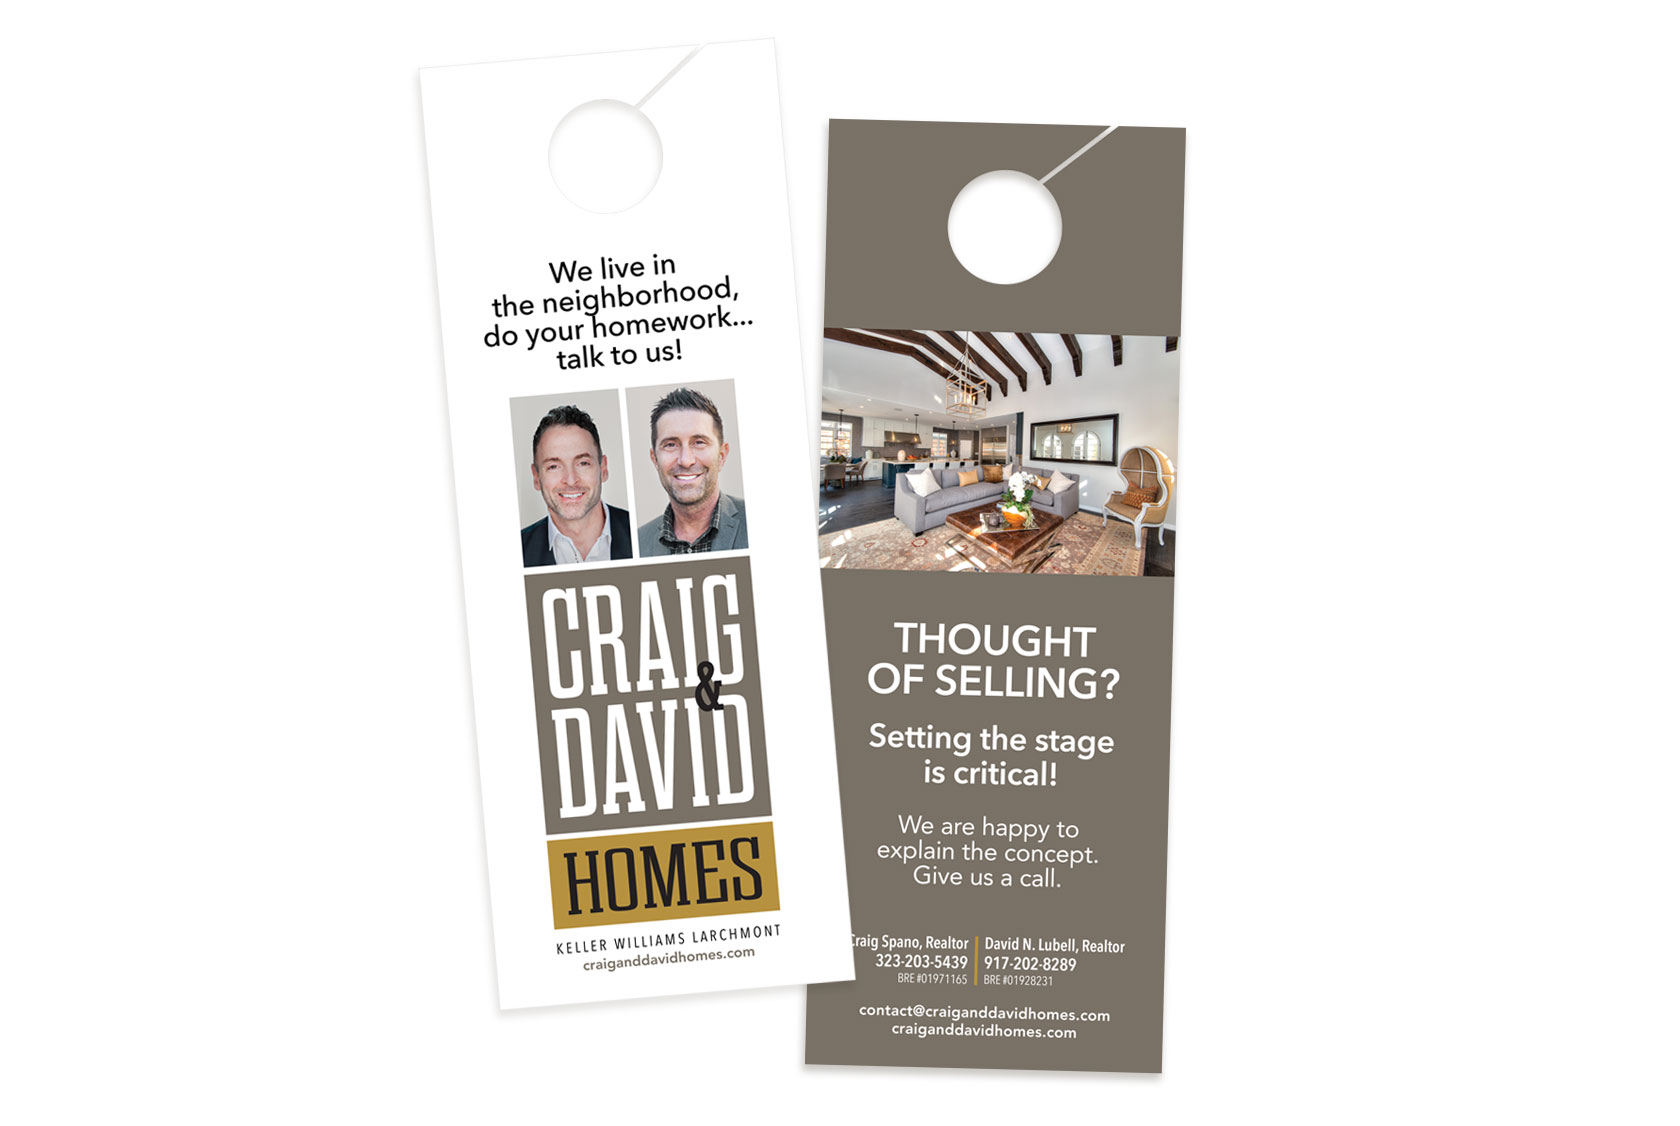 doorhanger design for a real estate business by Tastebuds: Los Angeles Branding + Small Business Marketing Consultant